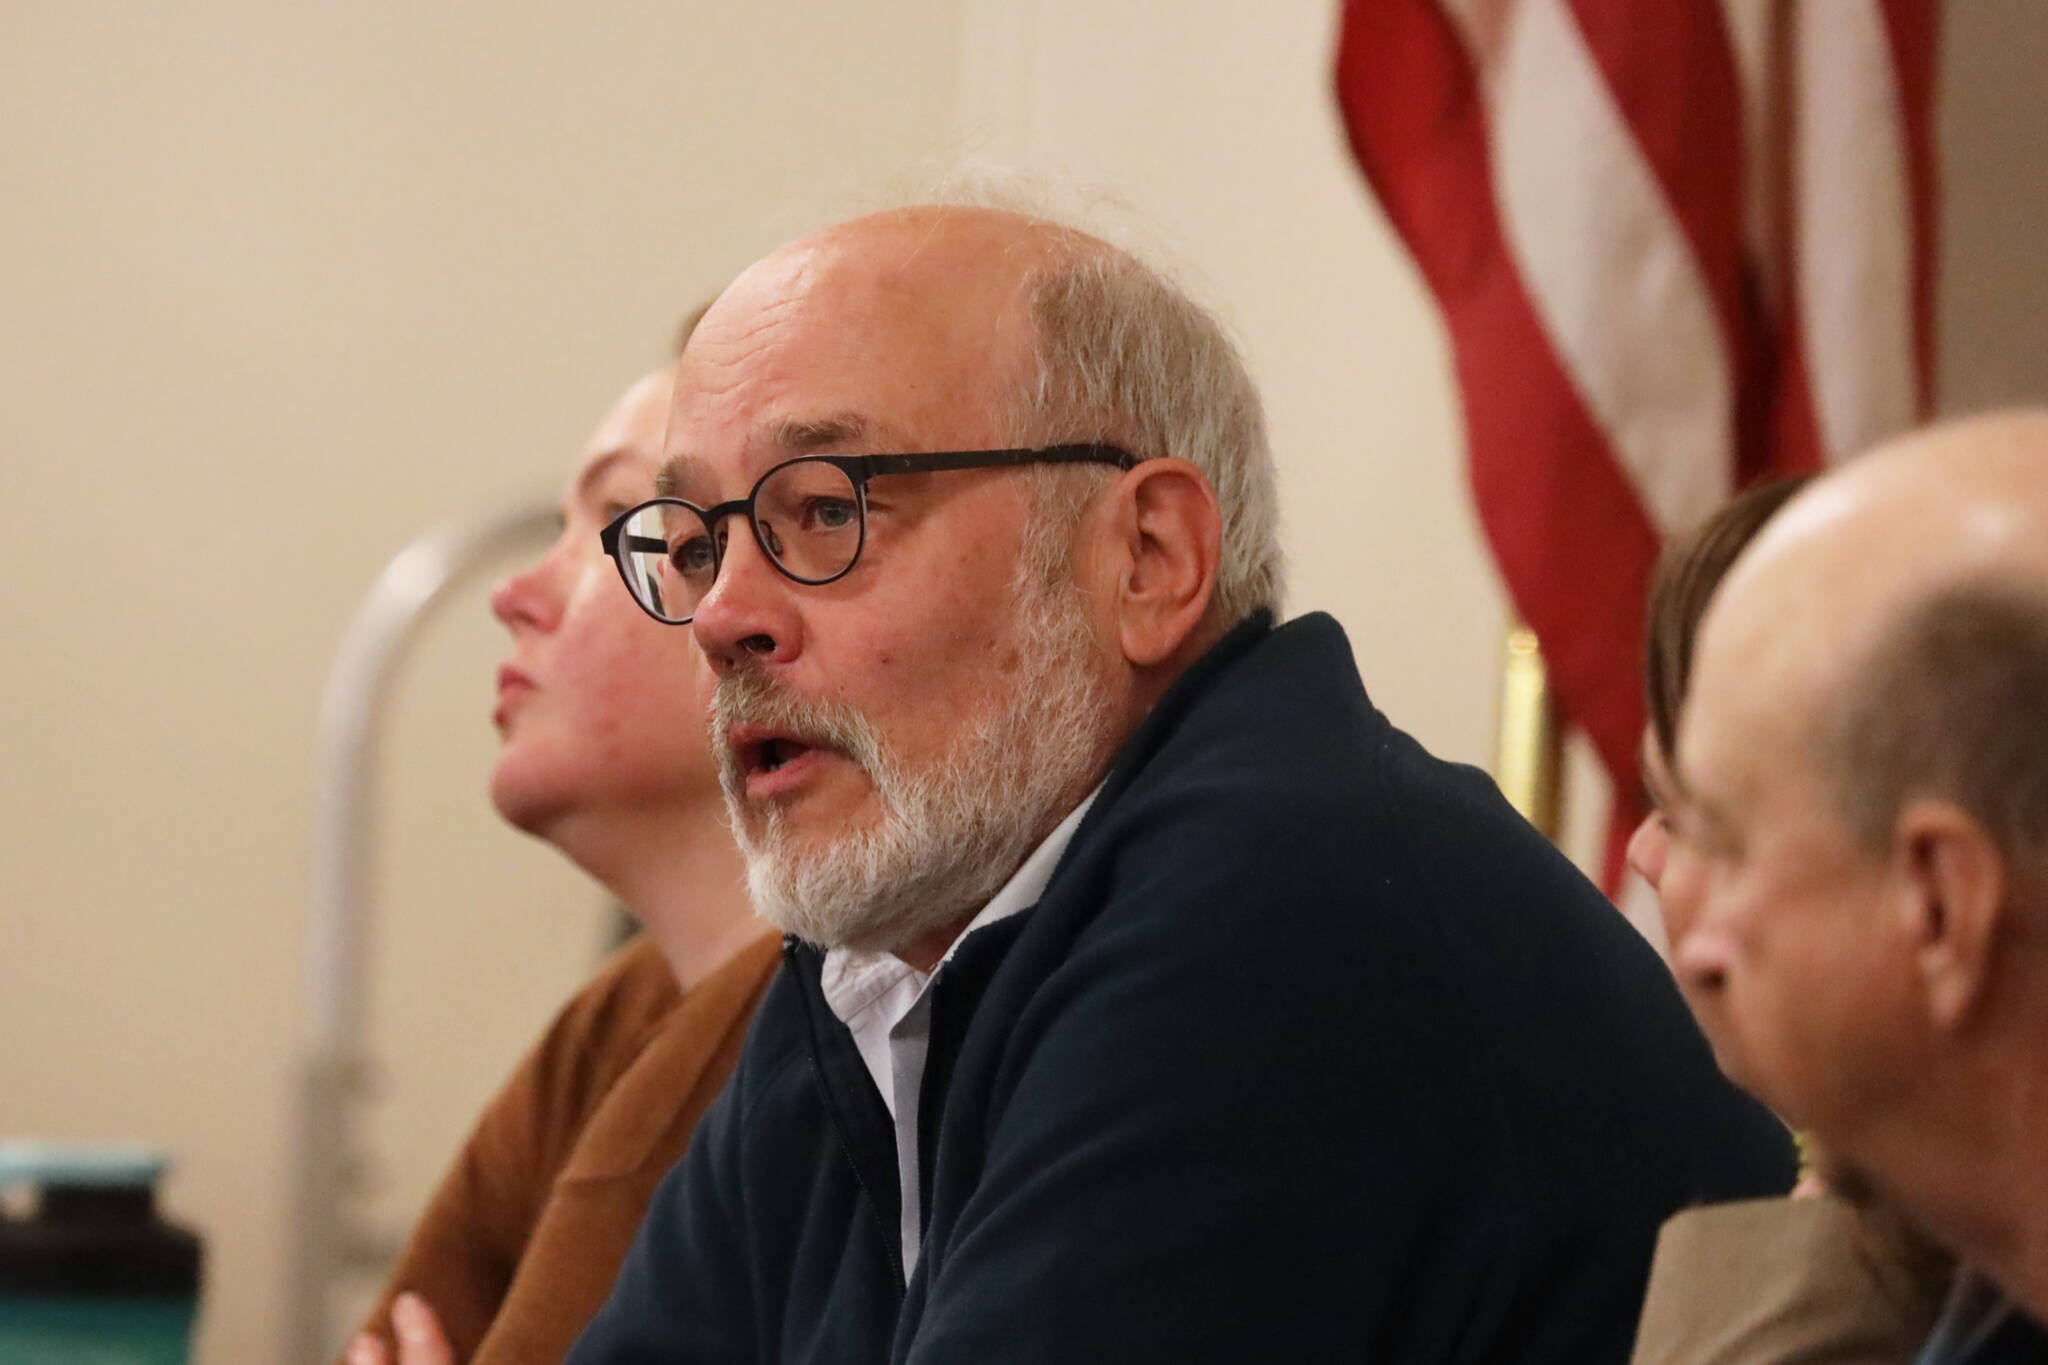 City and Borough of Juneau Assembly District 1 candidate Joe Geldhof answers a question during an election forum hosted by the Greater Juneau Chamber of Commerce on Thursday afternoon. (Clarise Larson / Juneau Empire)